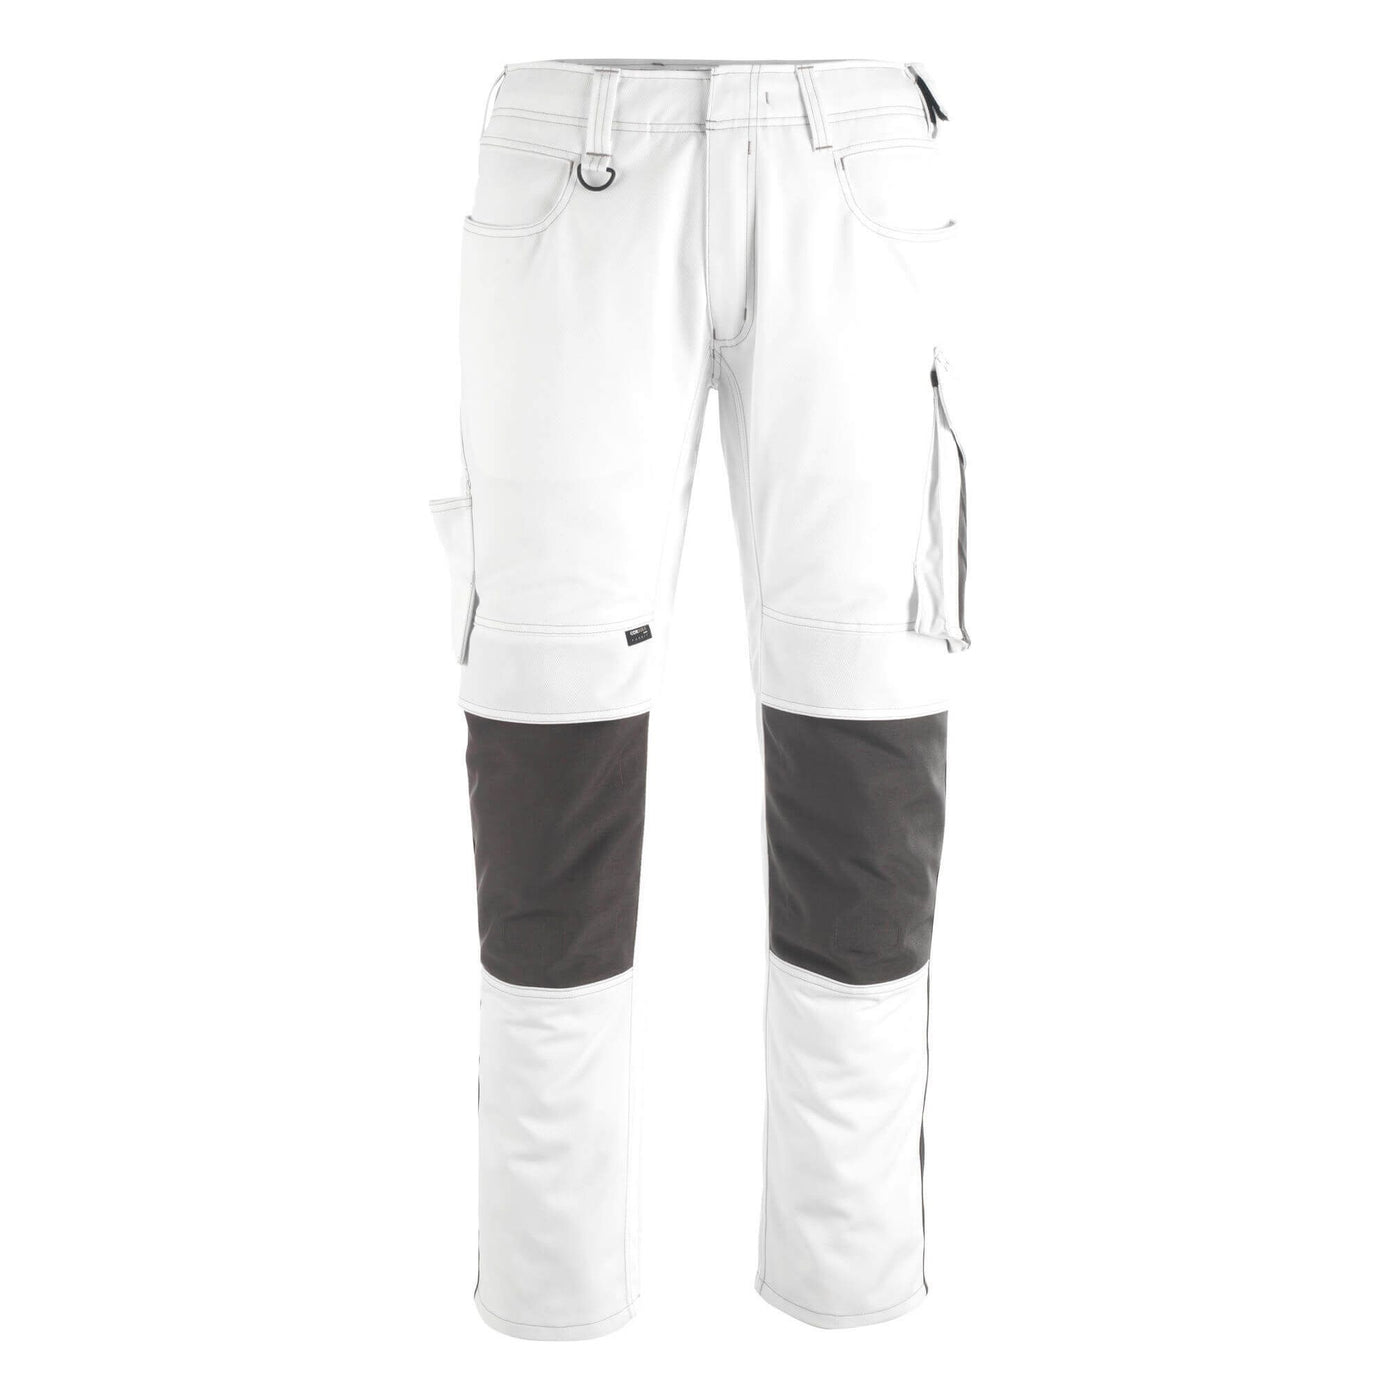 Mascot Erlangen Work Trousers Knee-Pad-Pockets 12179-203 Front #colour_white-dark-anthracite-grey